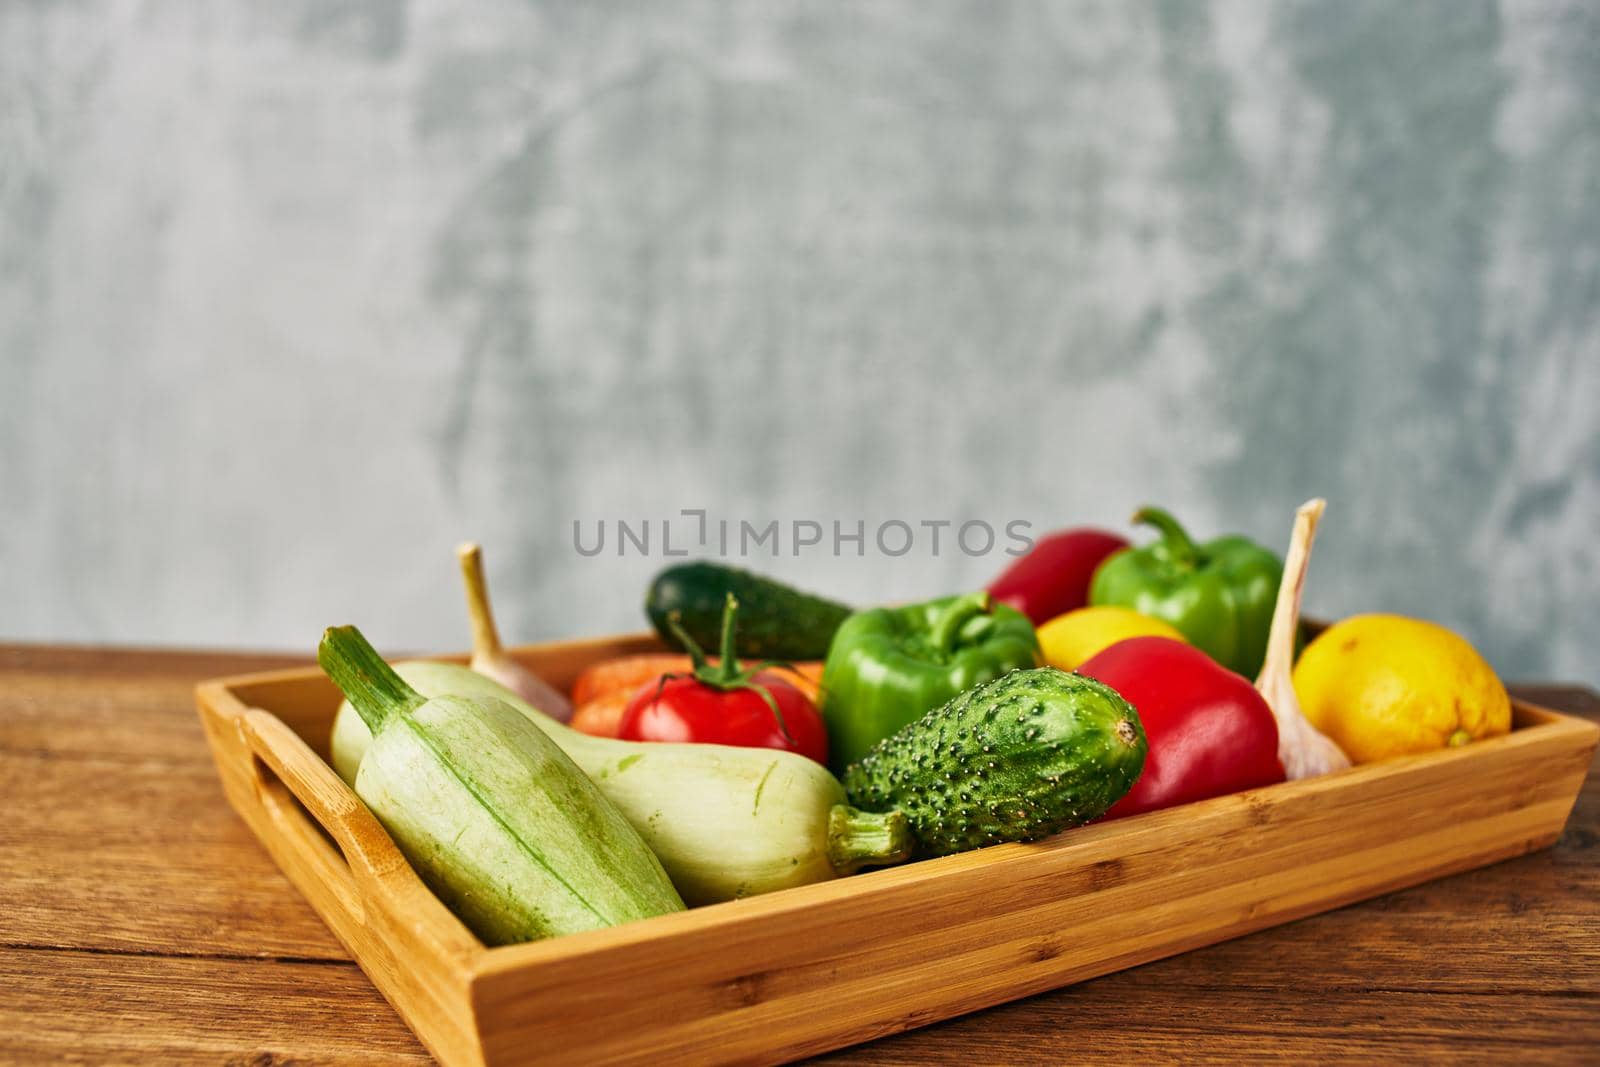 Ingredients fresh food diet health launch nutrition close-up. High quality photo